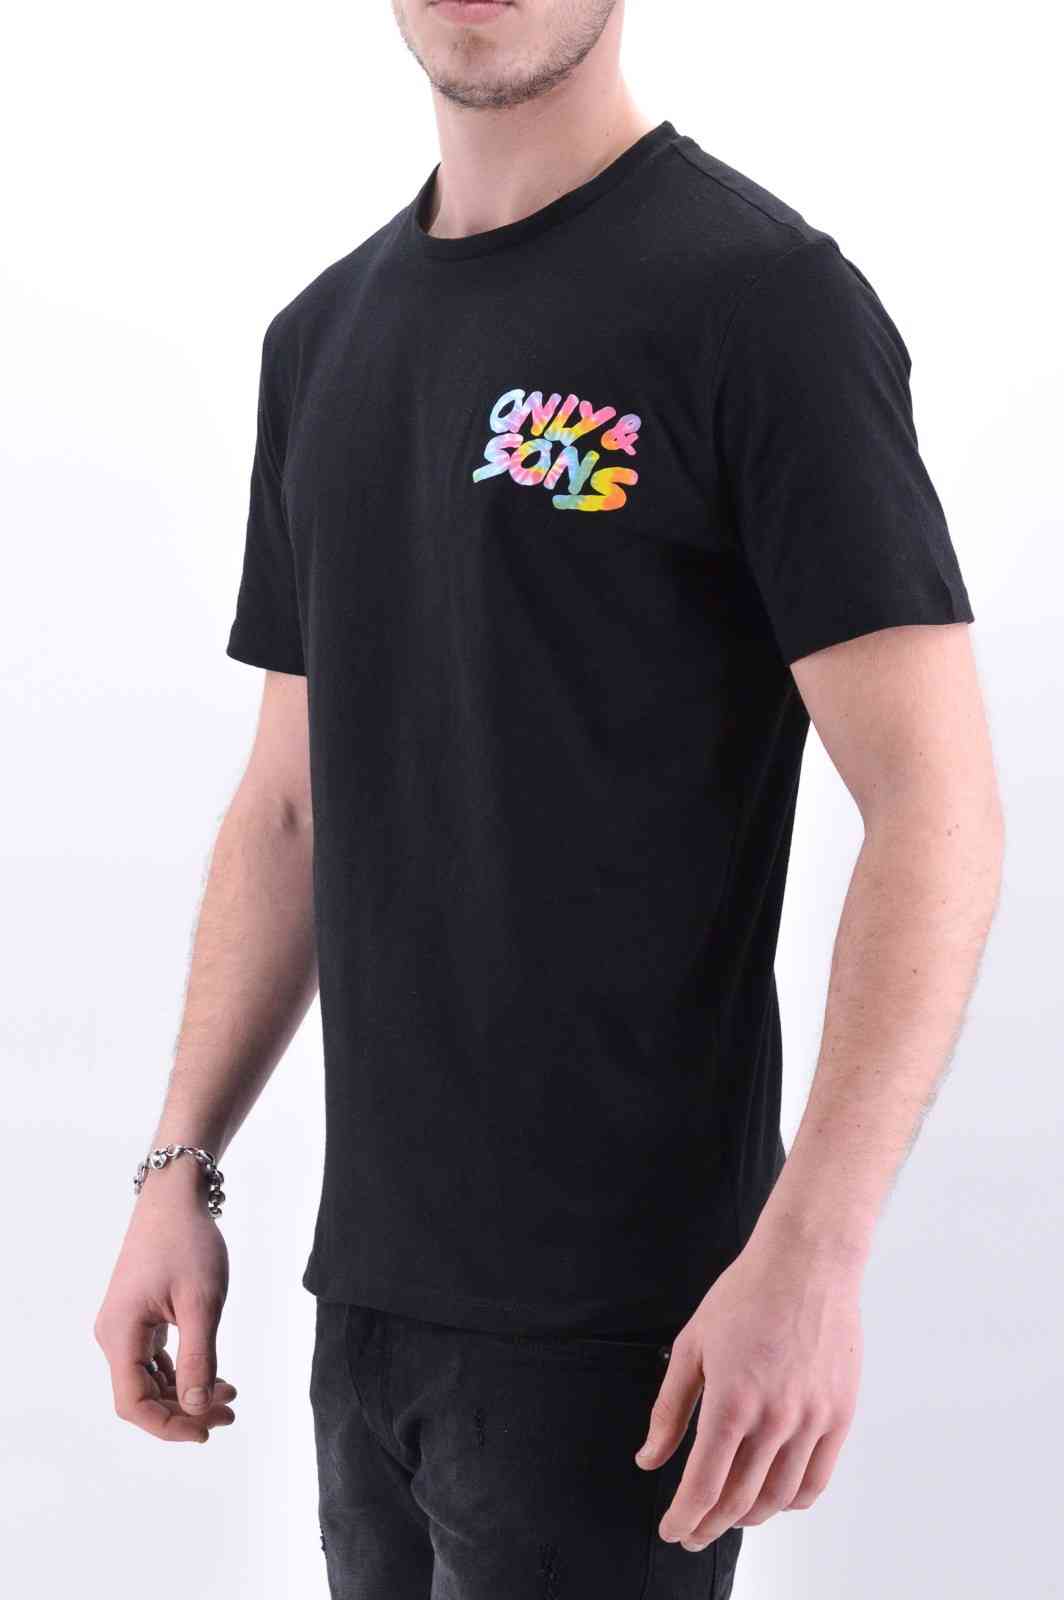 T-shirt homme: confort, polyvalence, style